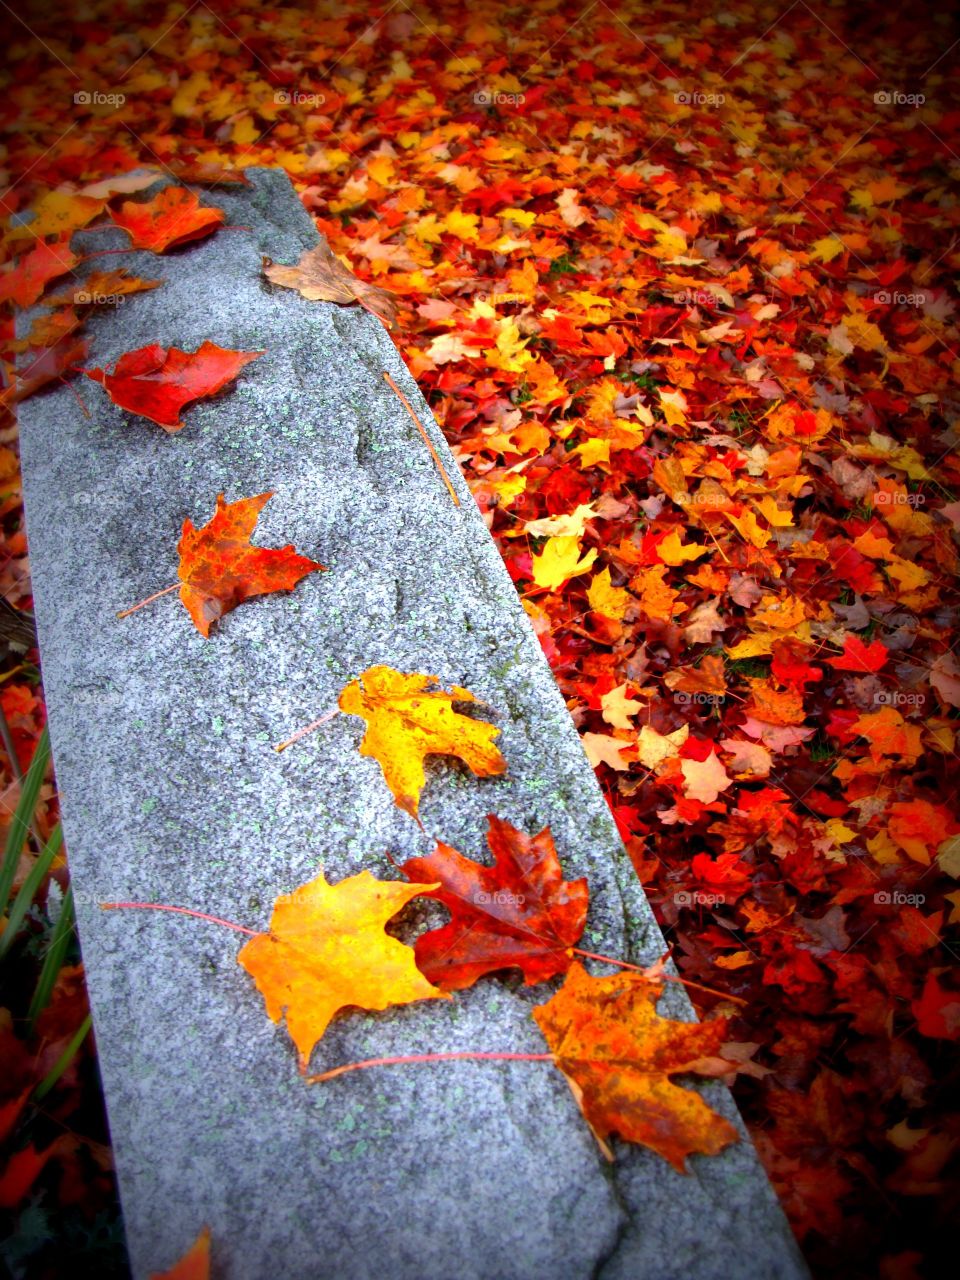 A bed of freshly fallen Autumn leaves on the ground with a few scattered upon the top of a cemetery headstone.